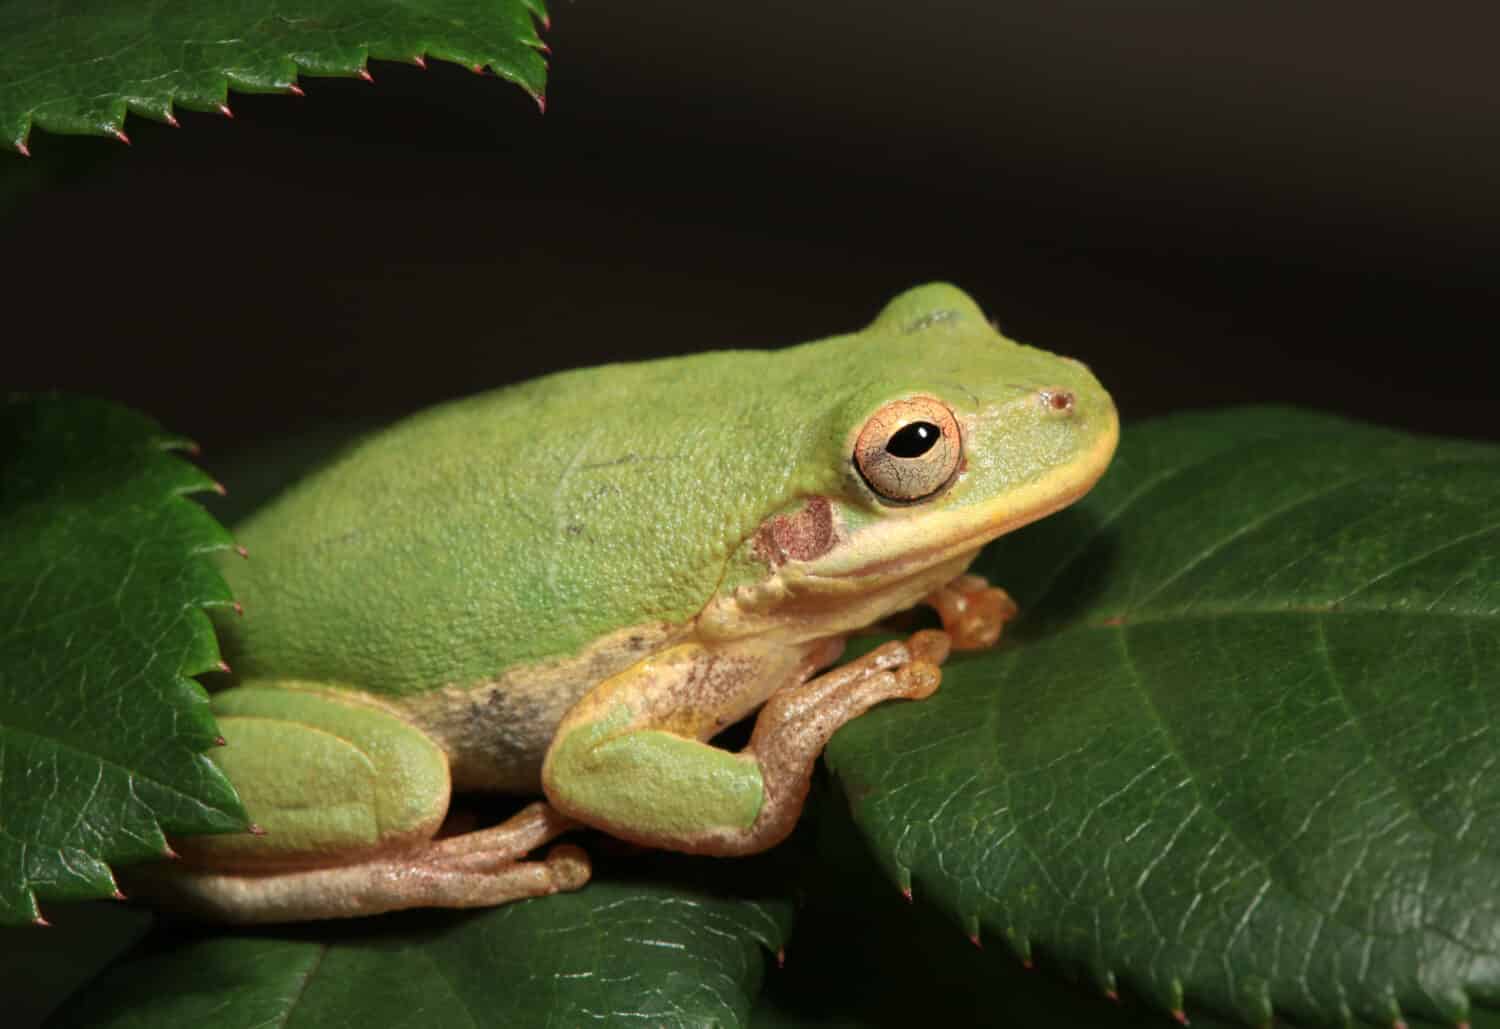 Squirrel Tree Frog on Rose Leaves